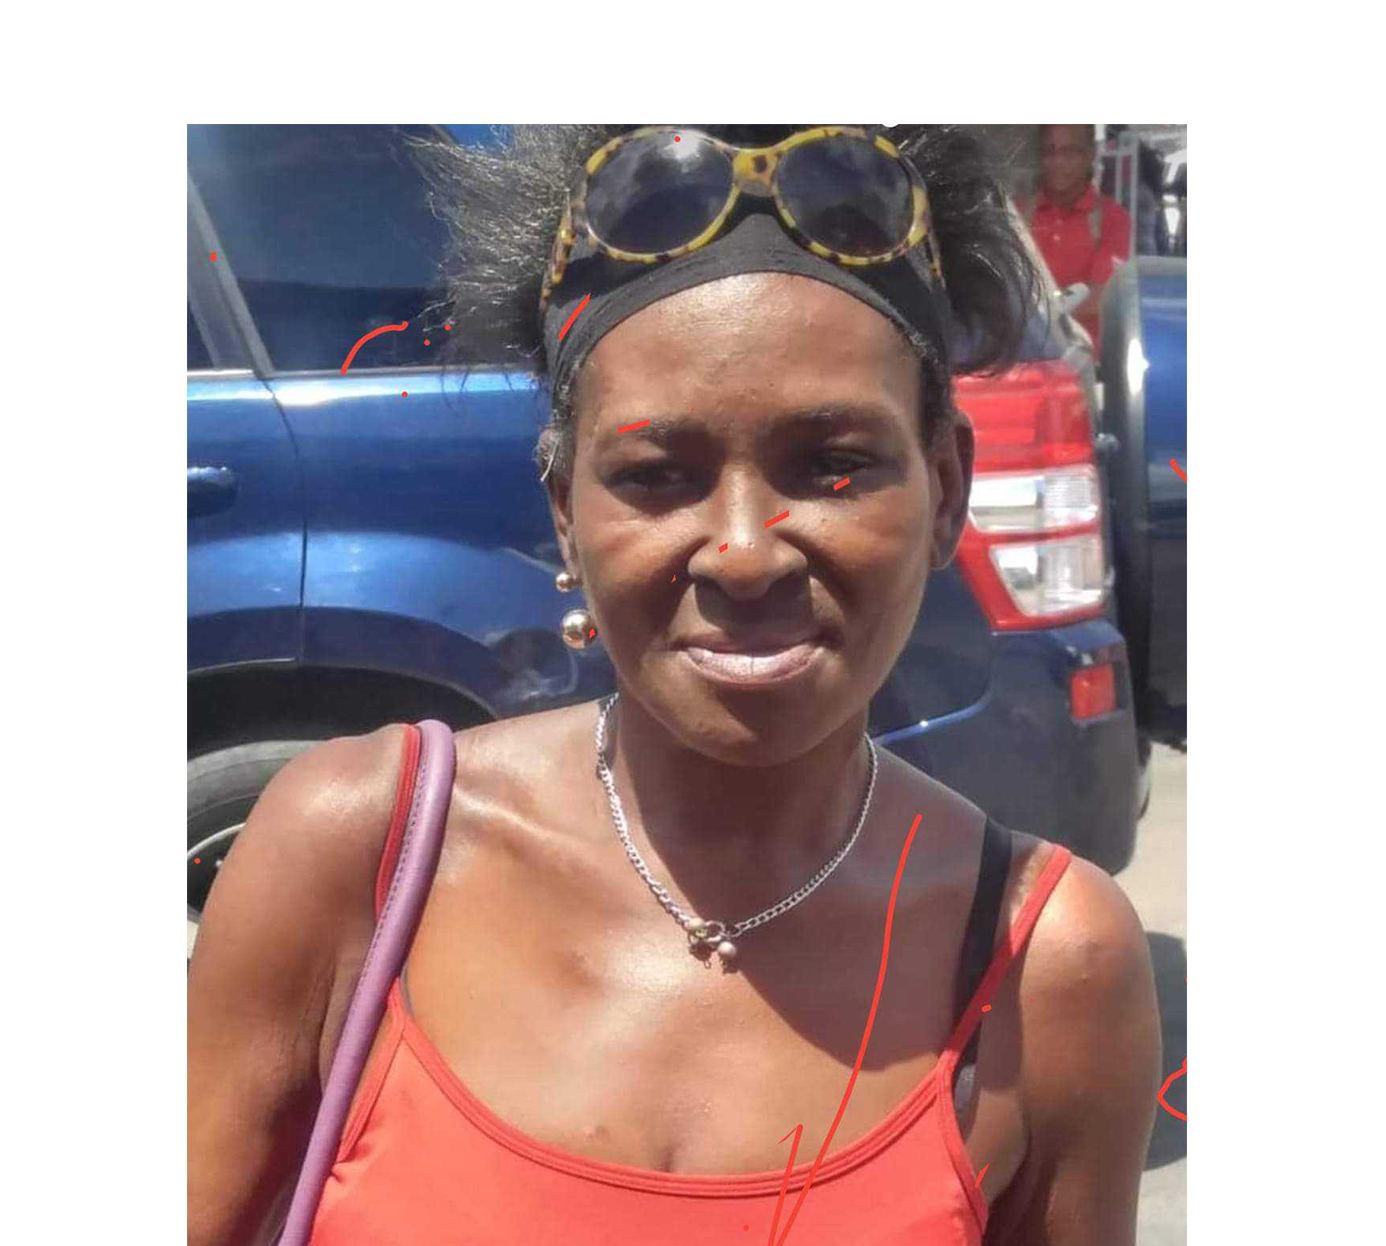 UPDATE: Woman Body Identified As Vernice Nelson of Portsmouth